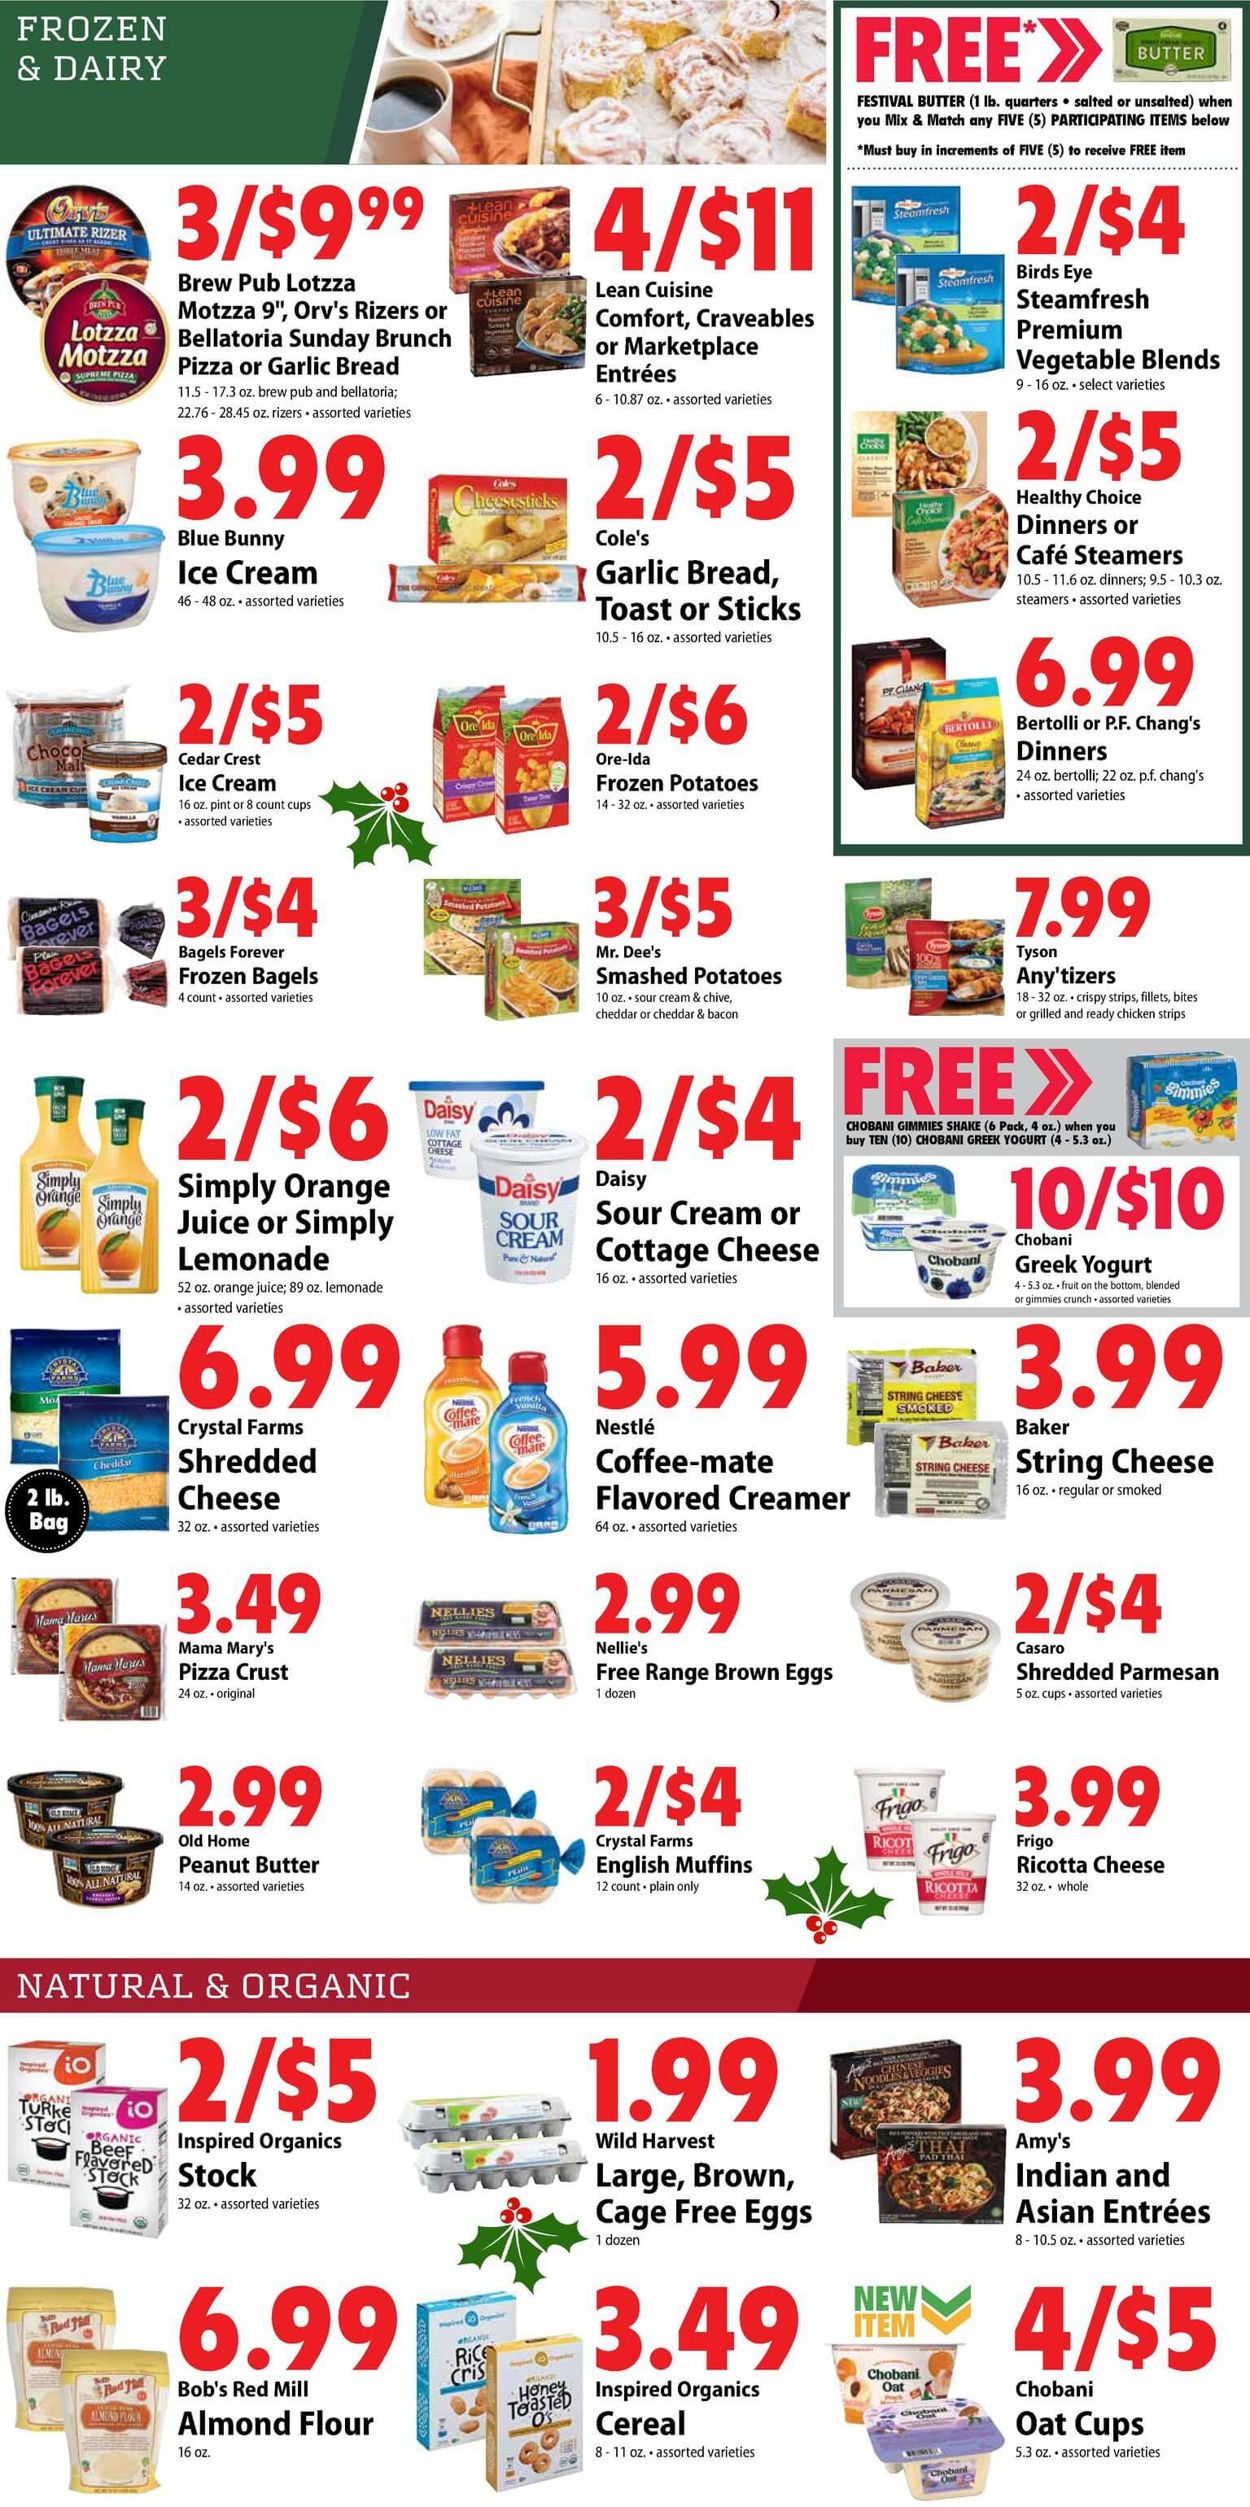 Festival Foods - Christmas Ad 2019 Weekly Ad Circular - valid 12/11-12/17/2019 (Page 7)